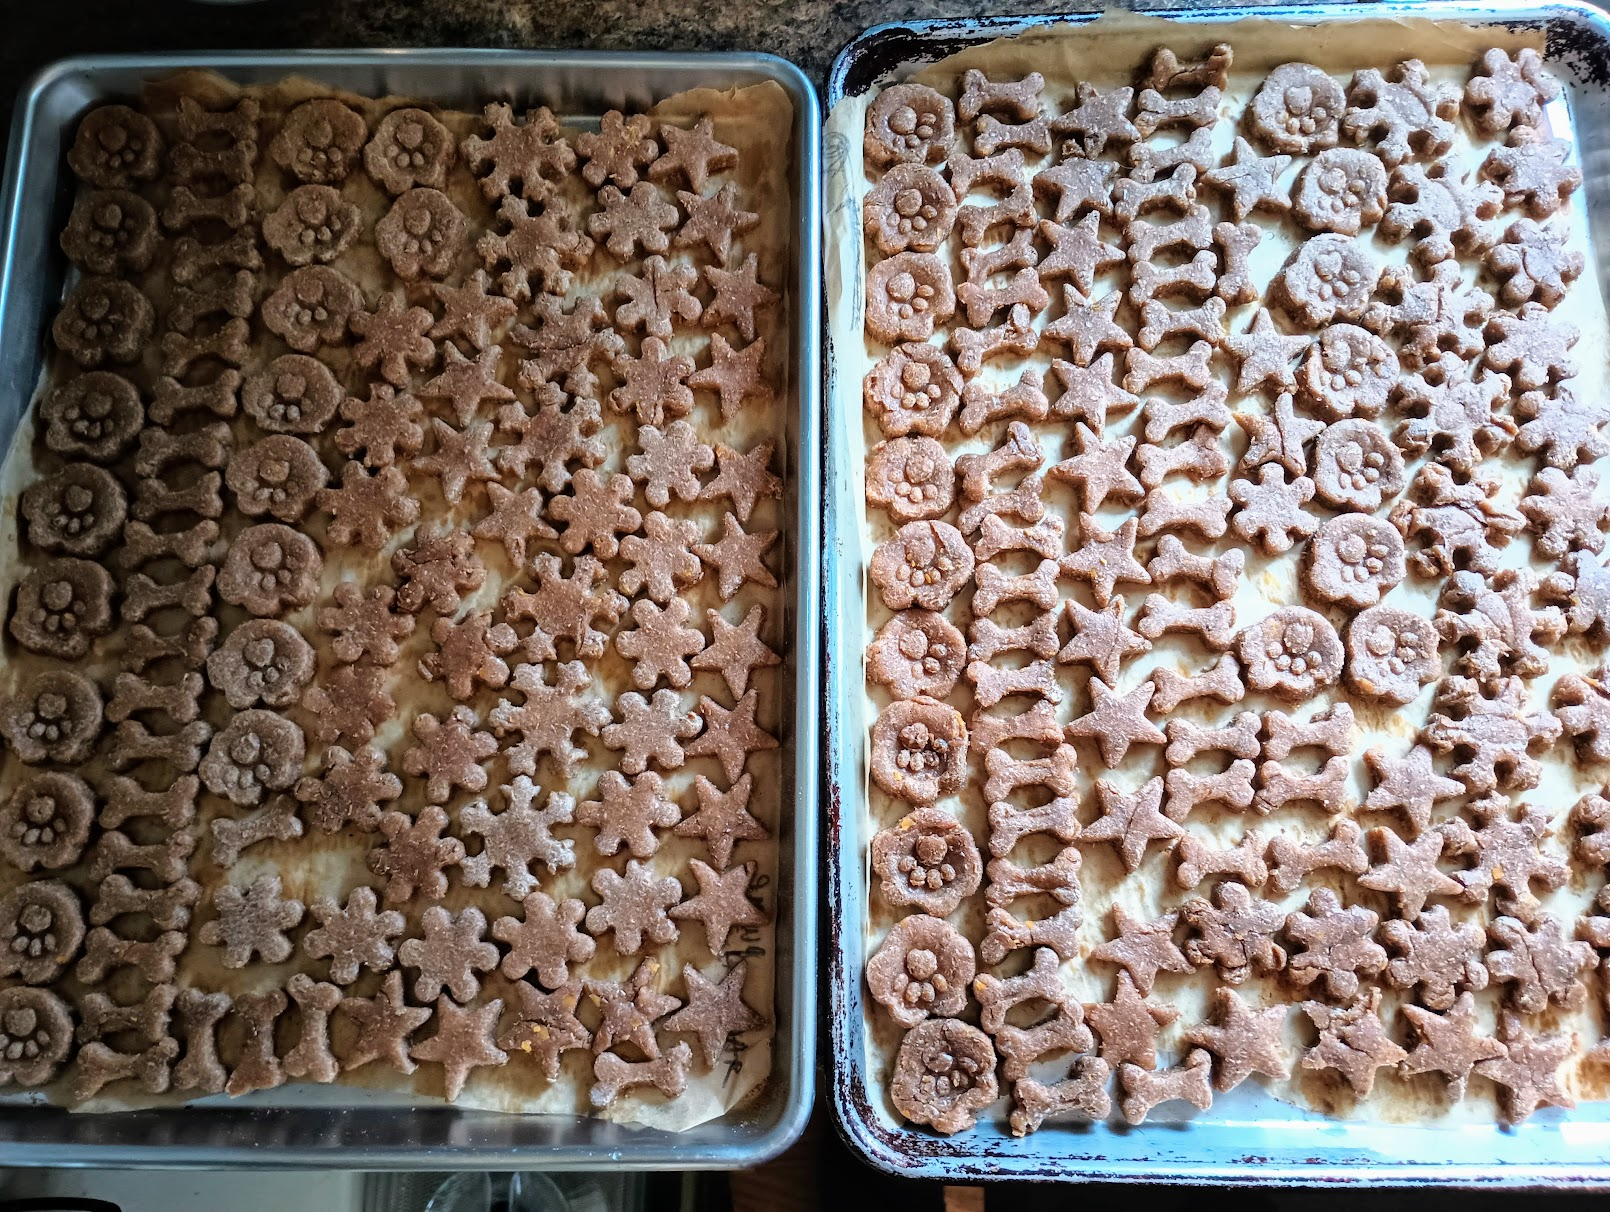 An assortment of dog treats in the shape of dog bones, paw prints, stars, and snowflakes on a baking sheet.